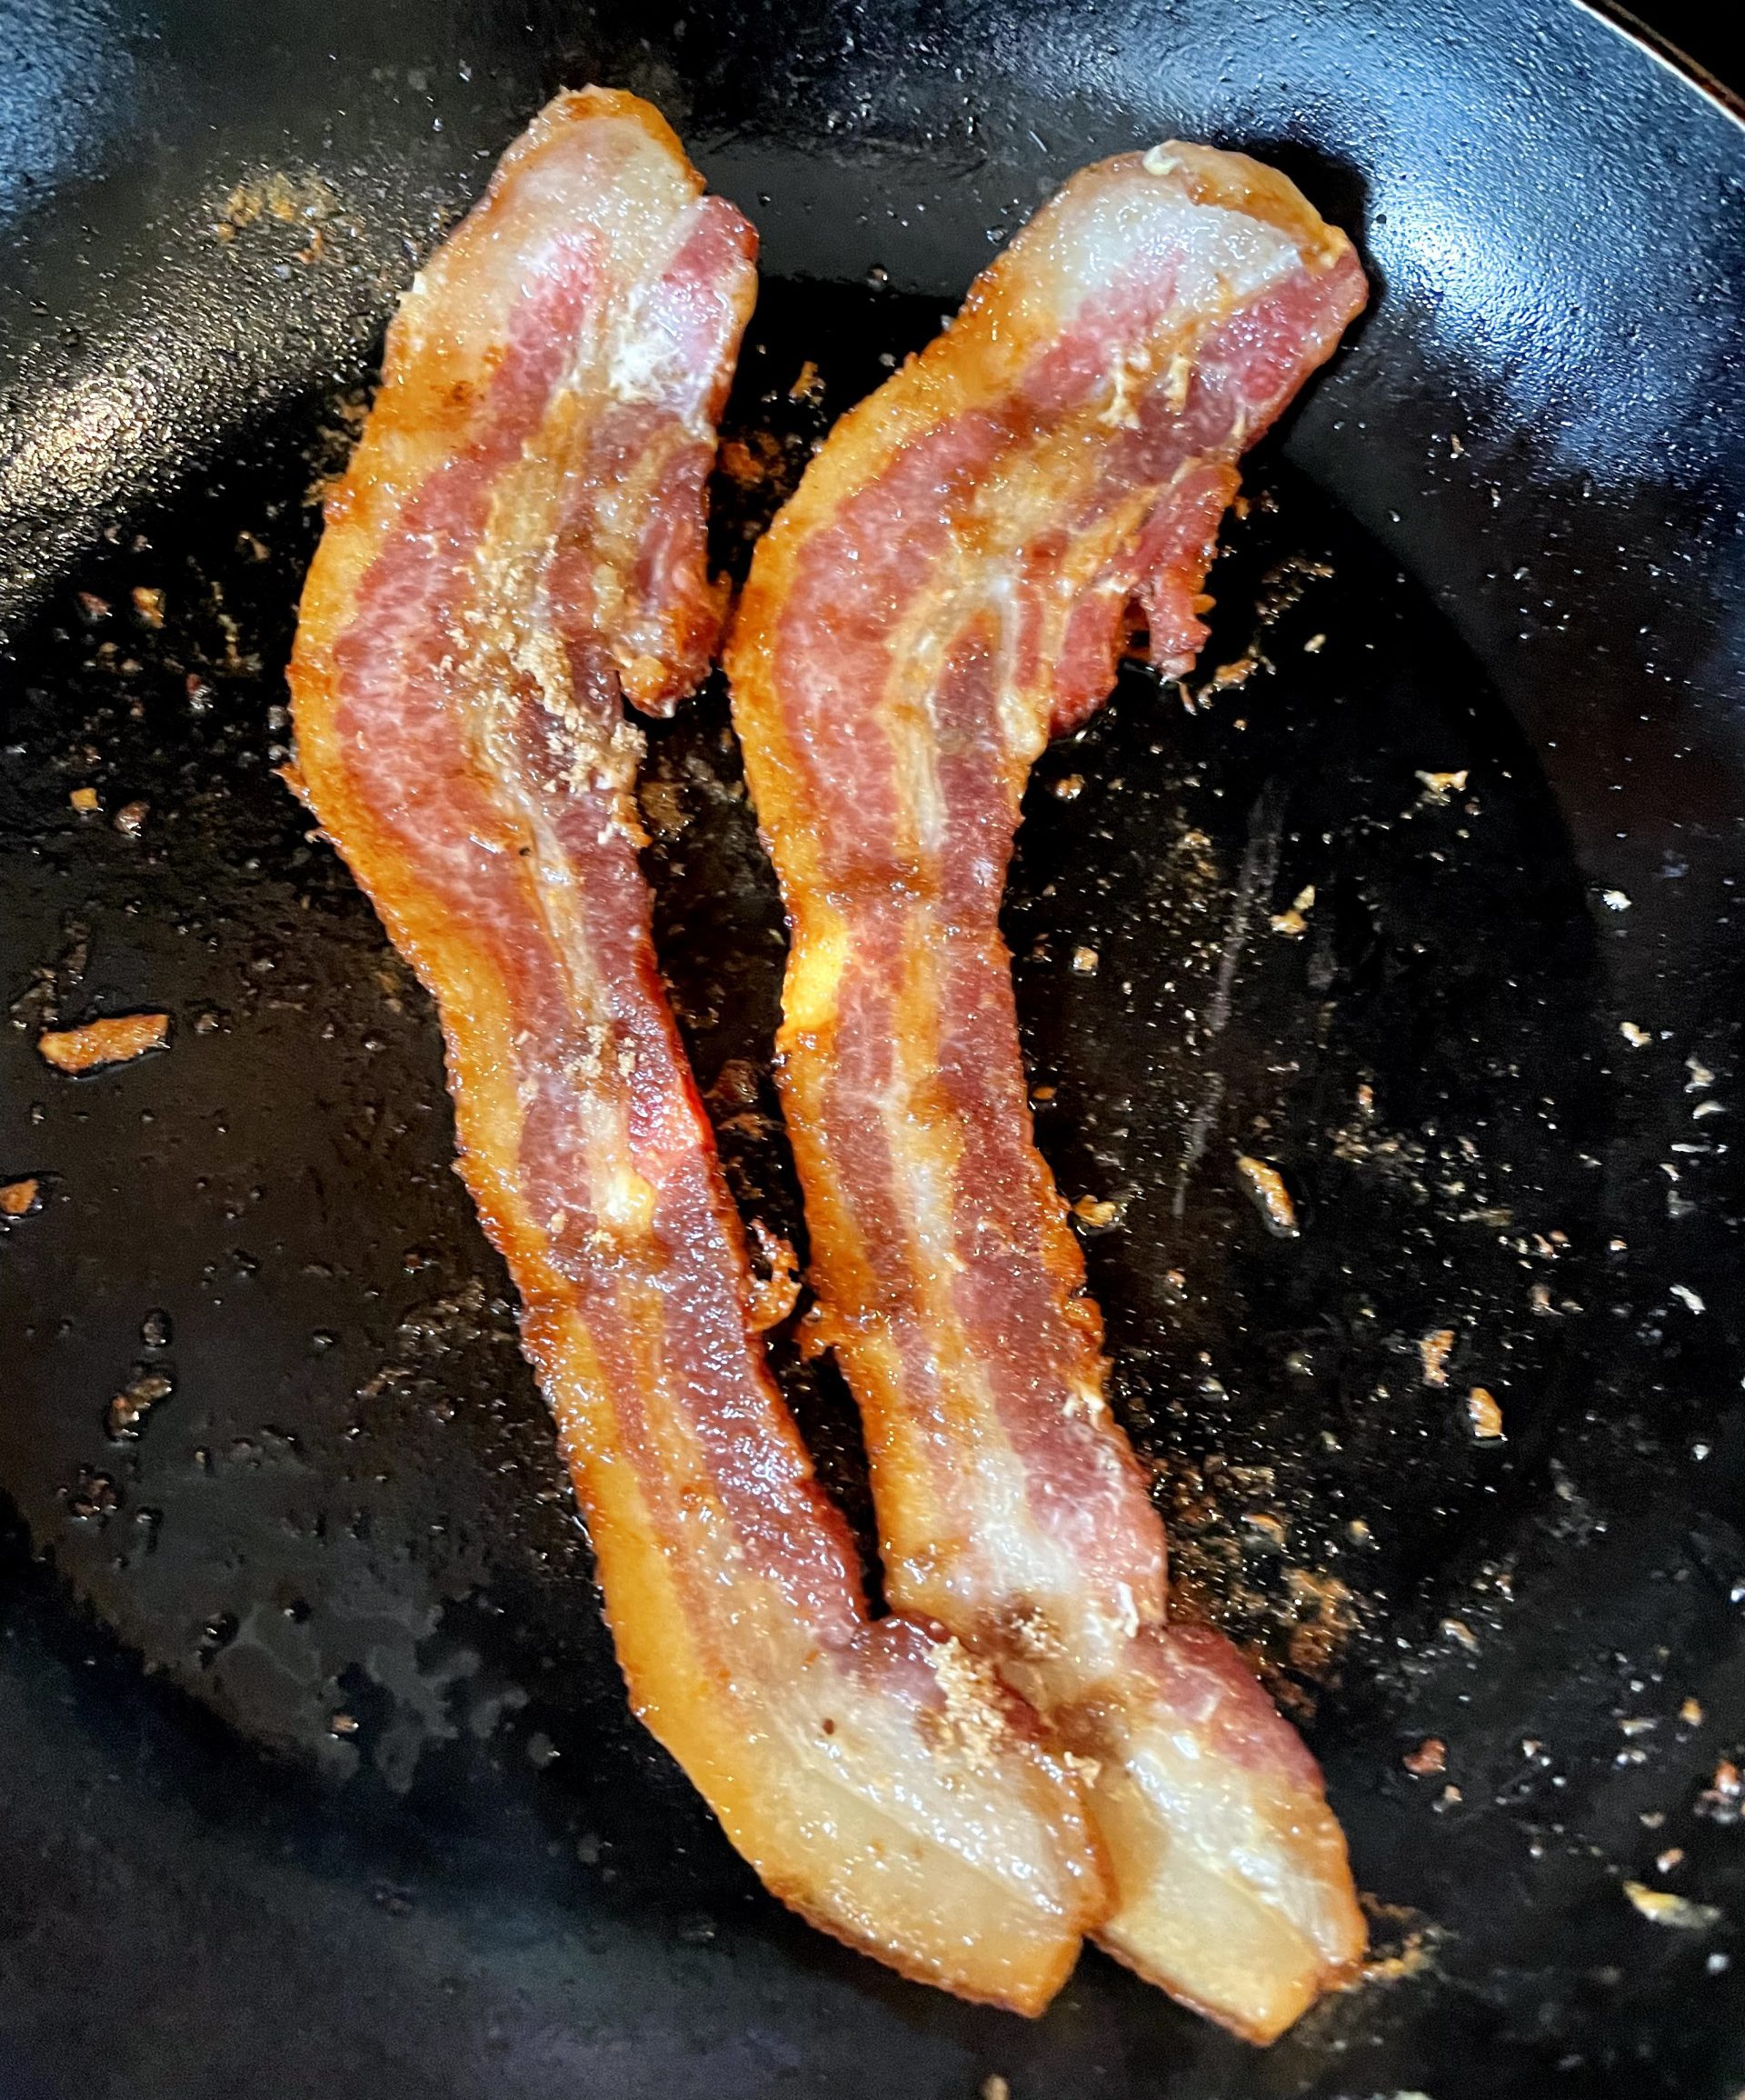 Add maple syrup or brown sugar to almost cooked bacon